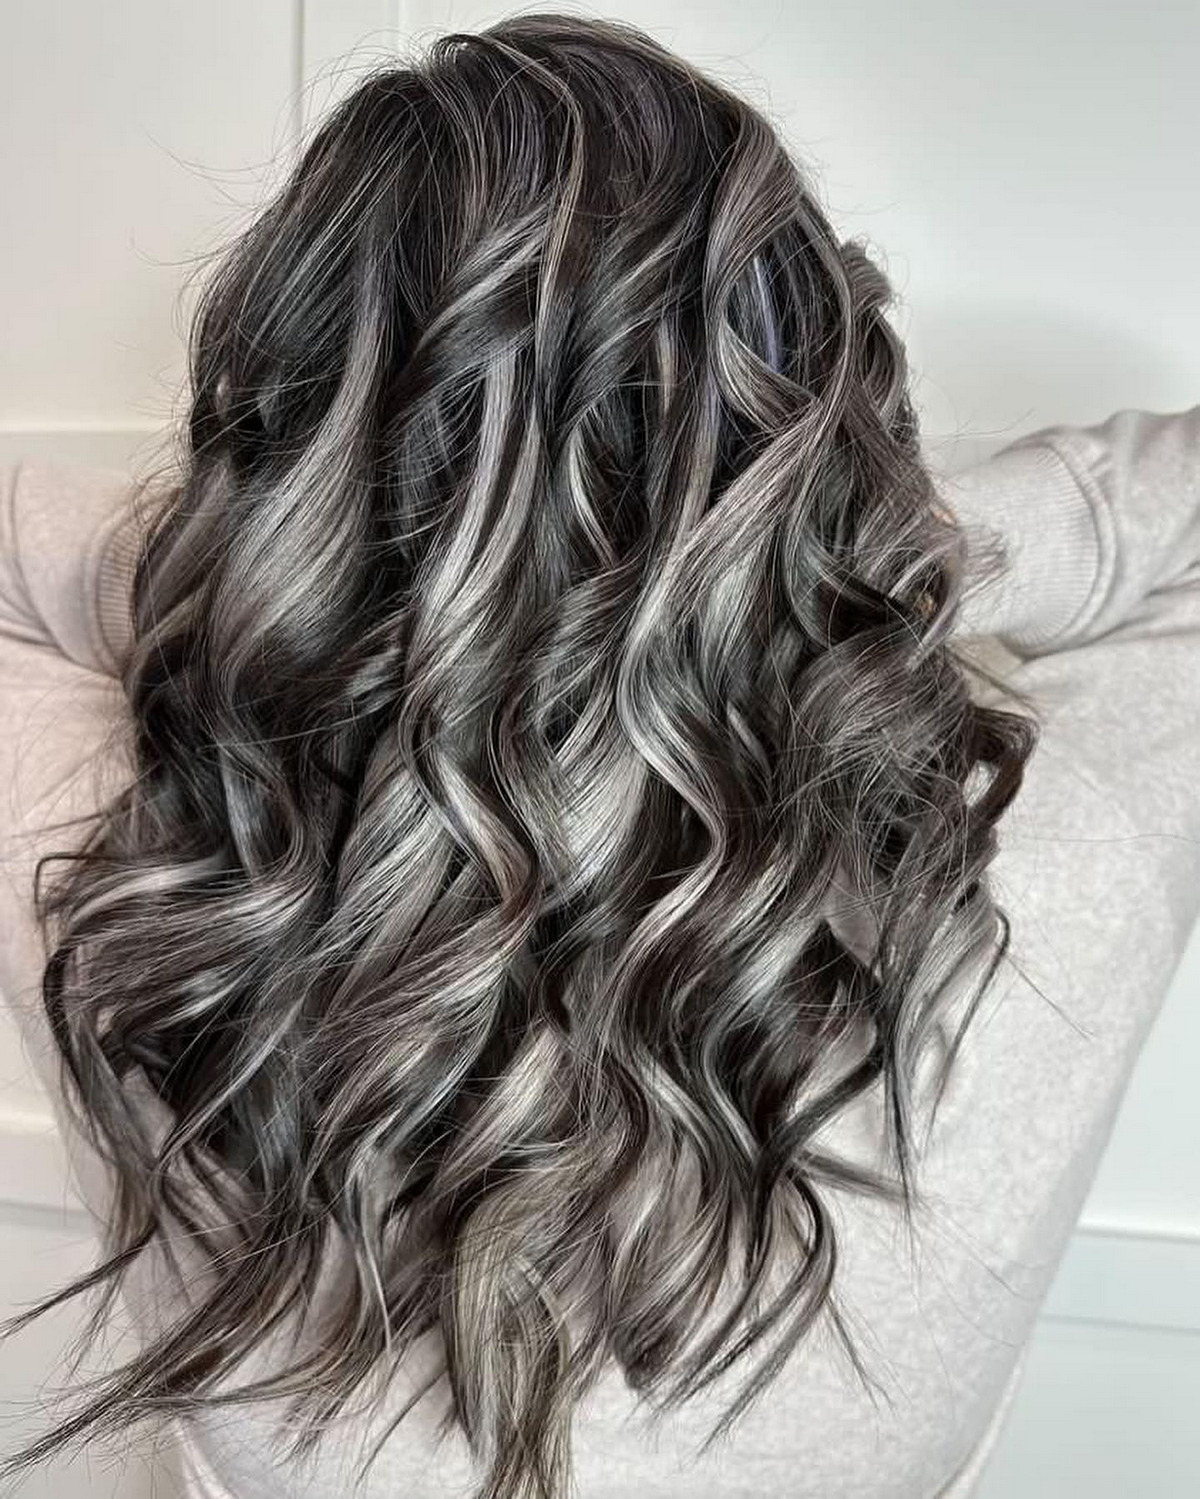 Long Dark Waves with Silver Highlights